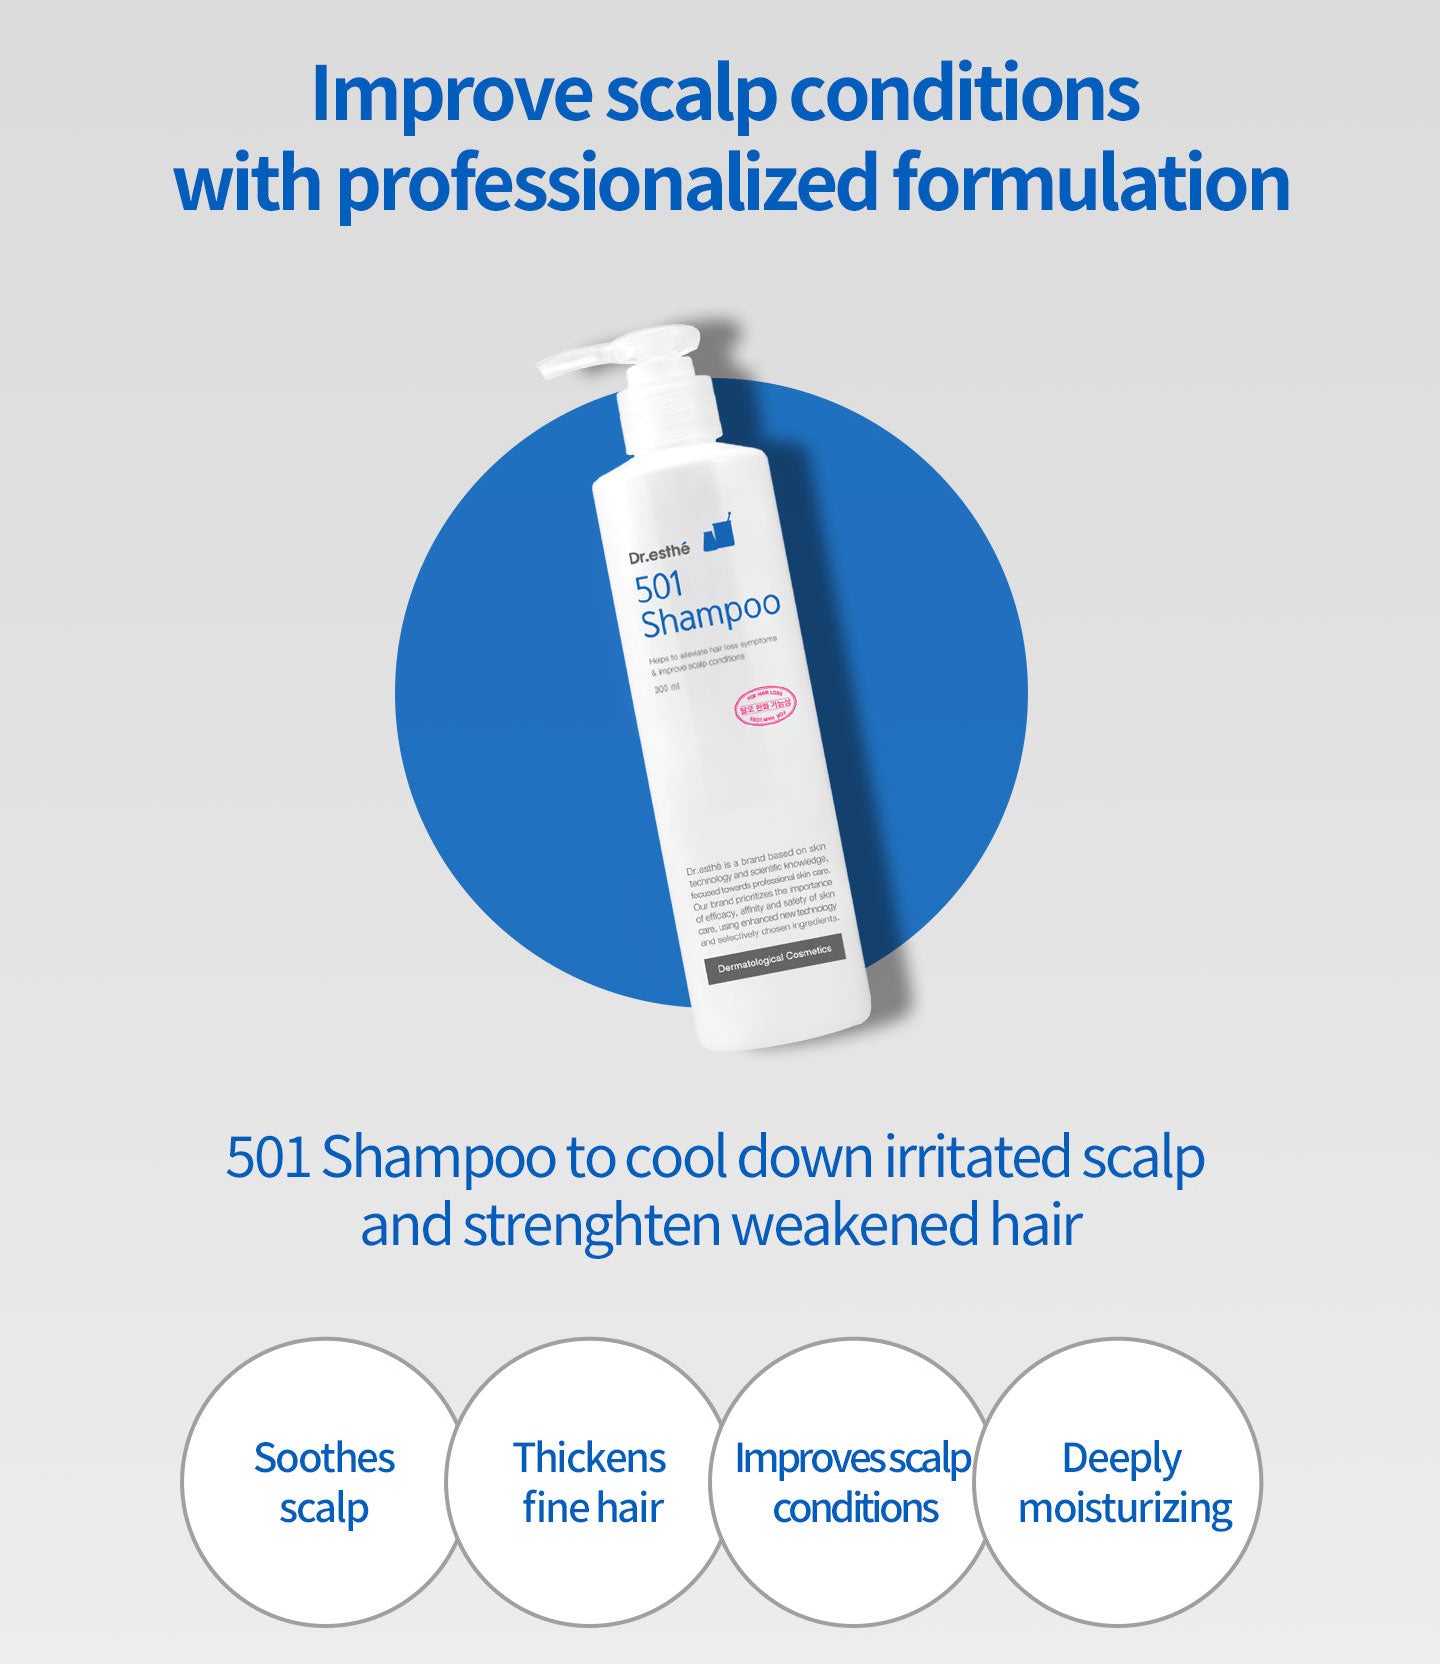 Improve scalp conditions with professionalized formulation. Soothes scalp, thickens fine hair, improves scalp conditions and deeply moisturizing. 